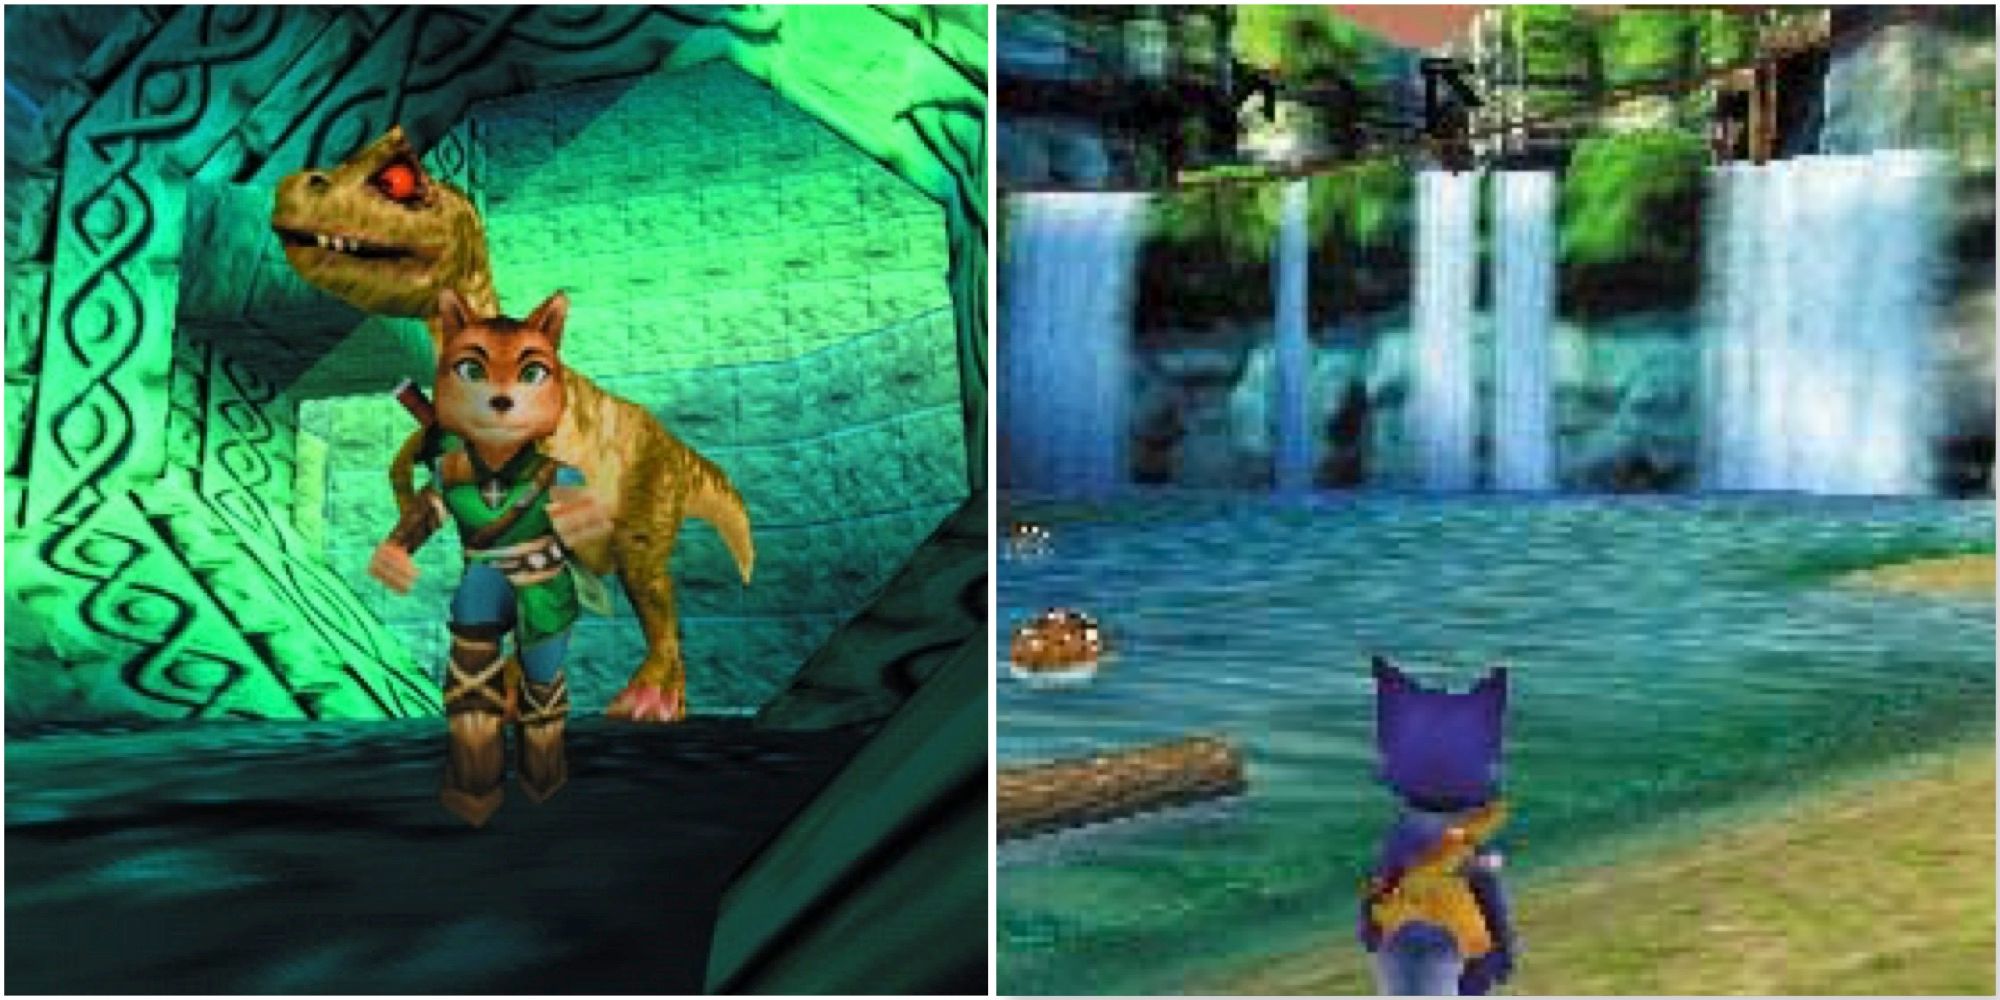 Star Fox Adventures prototype images from the N64 version